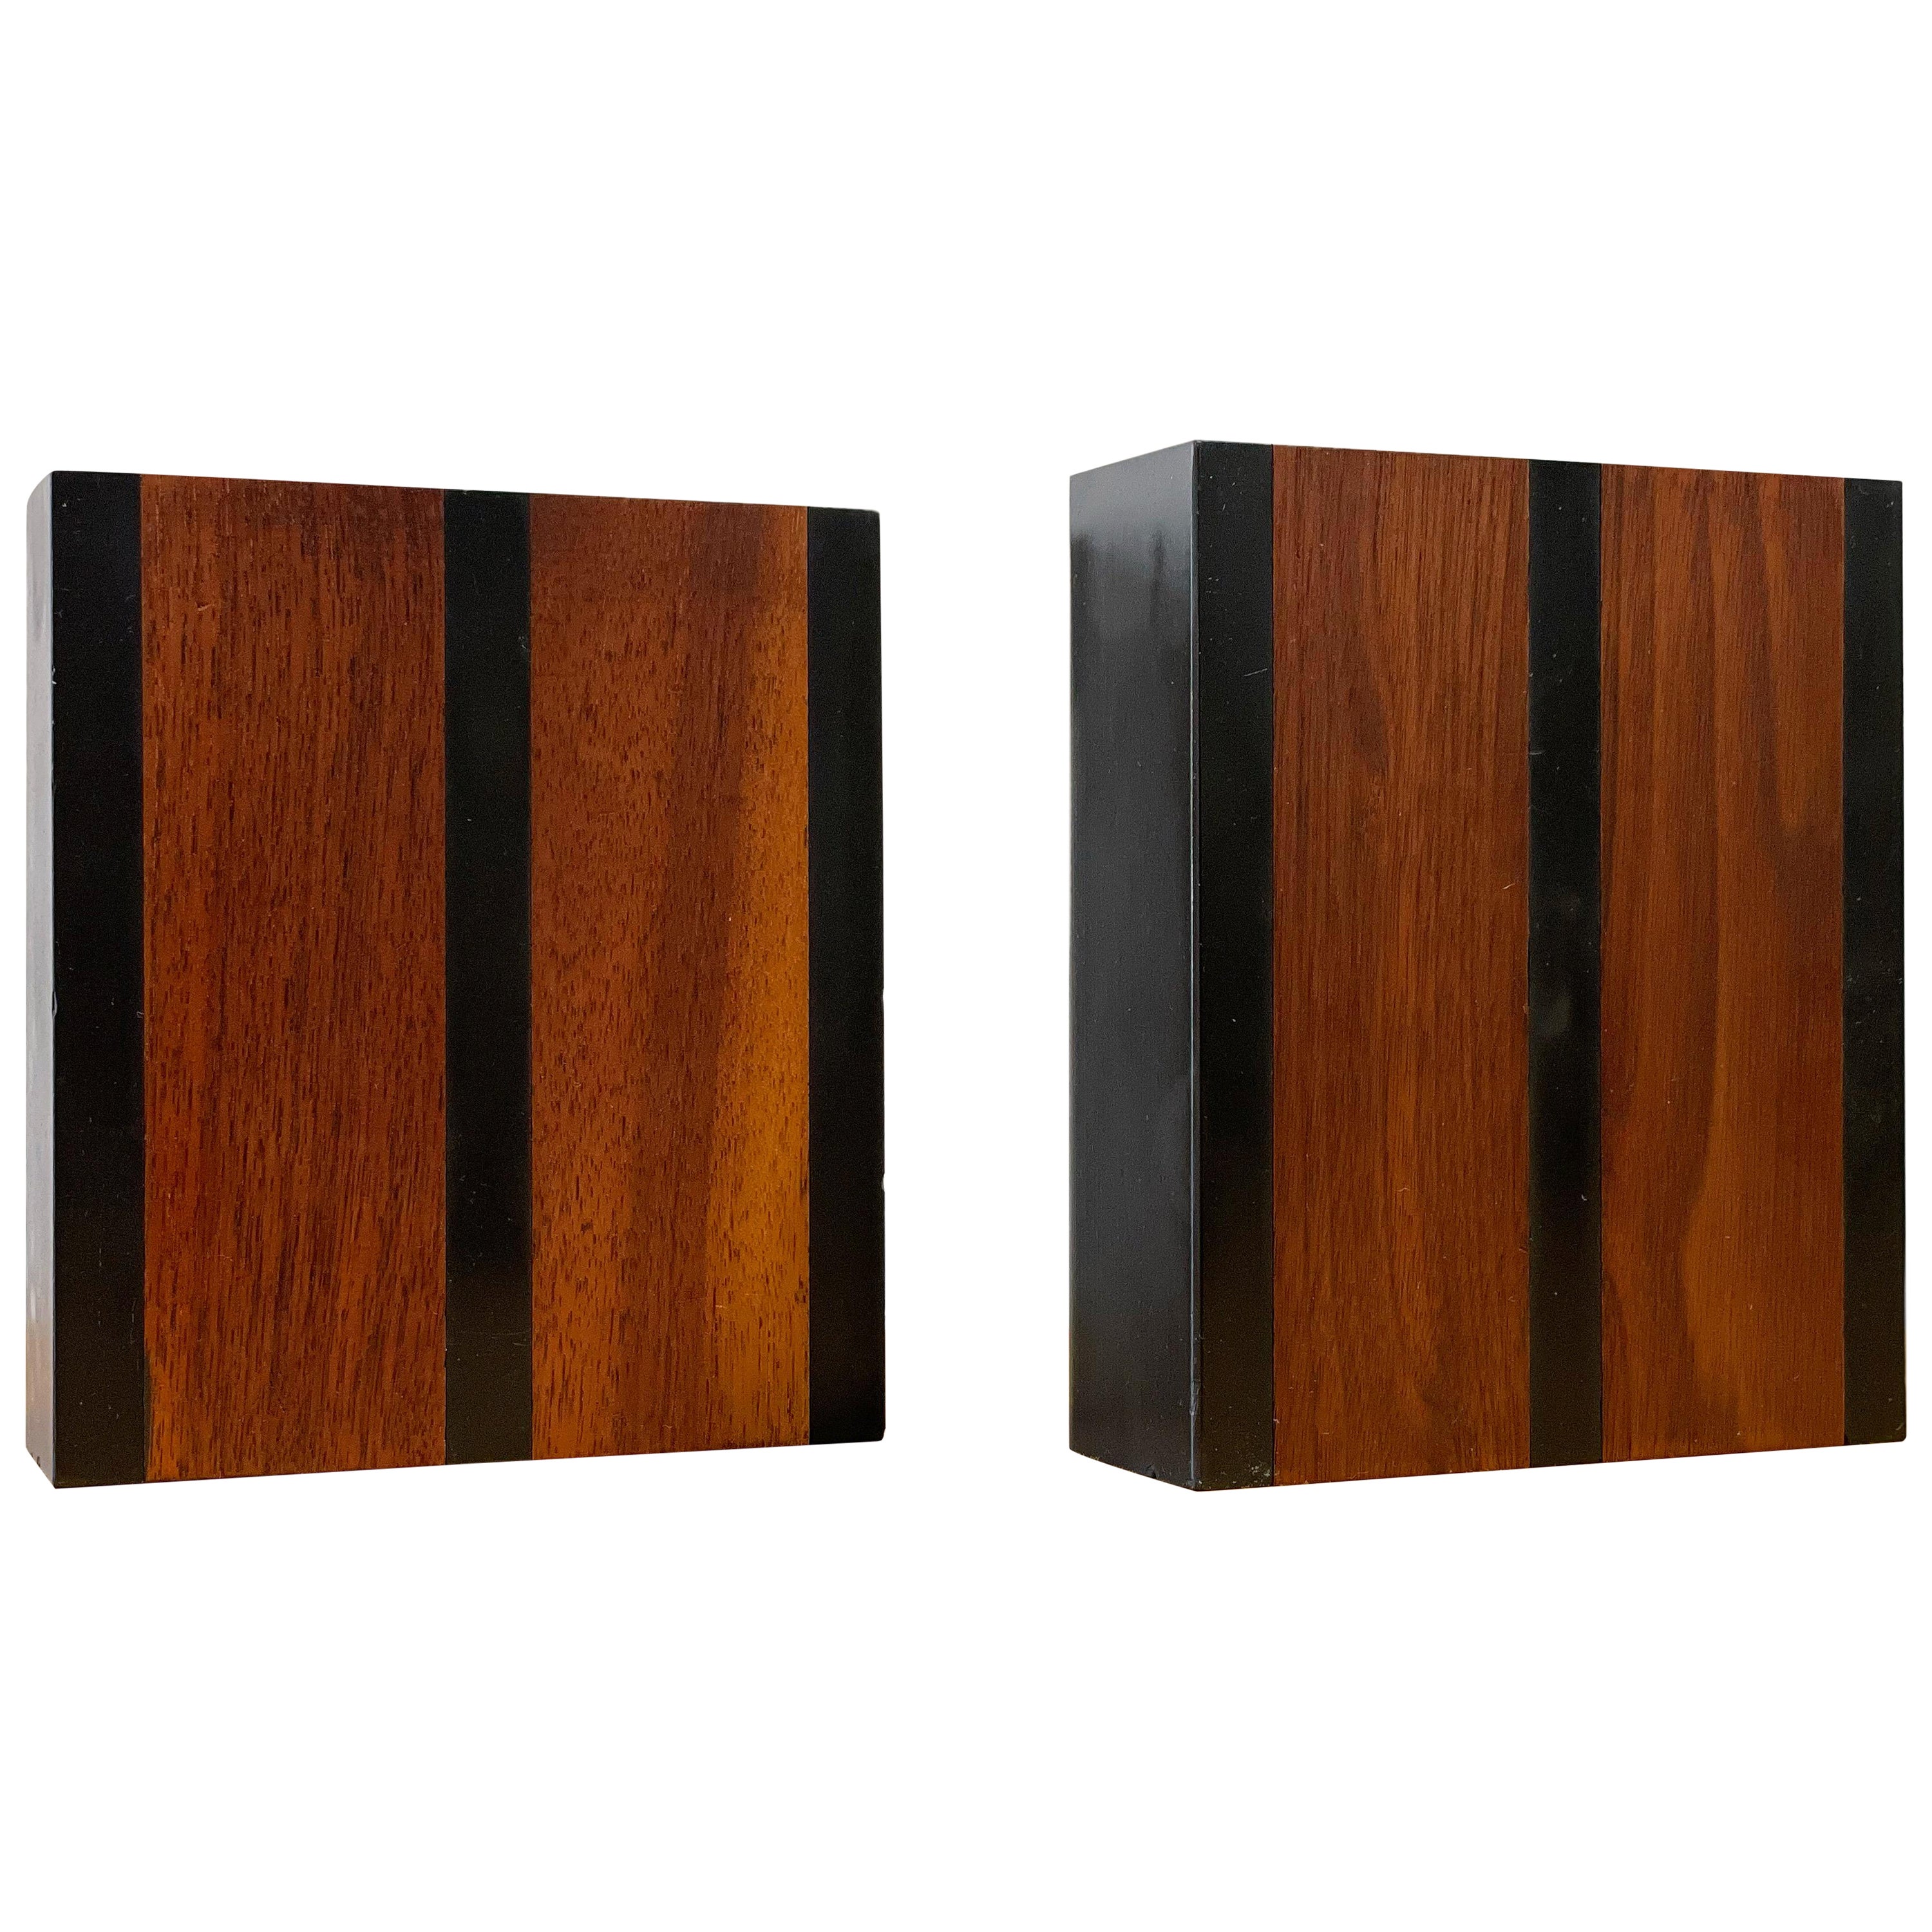 Harpswell House Walnut and Slate Modernist Bookends, After Phillip Lloyd Powell